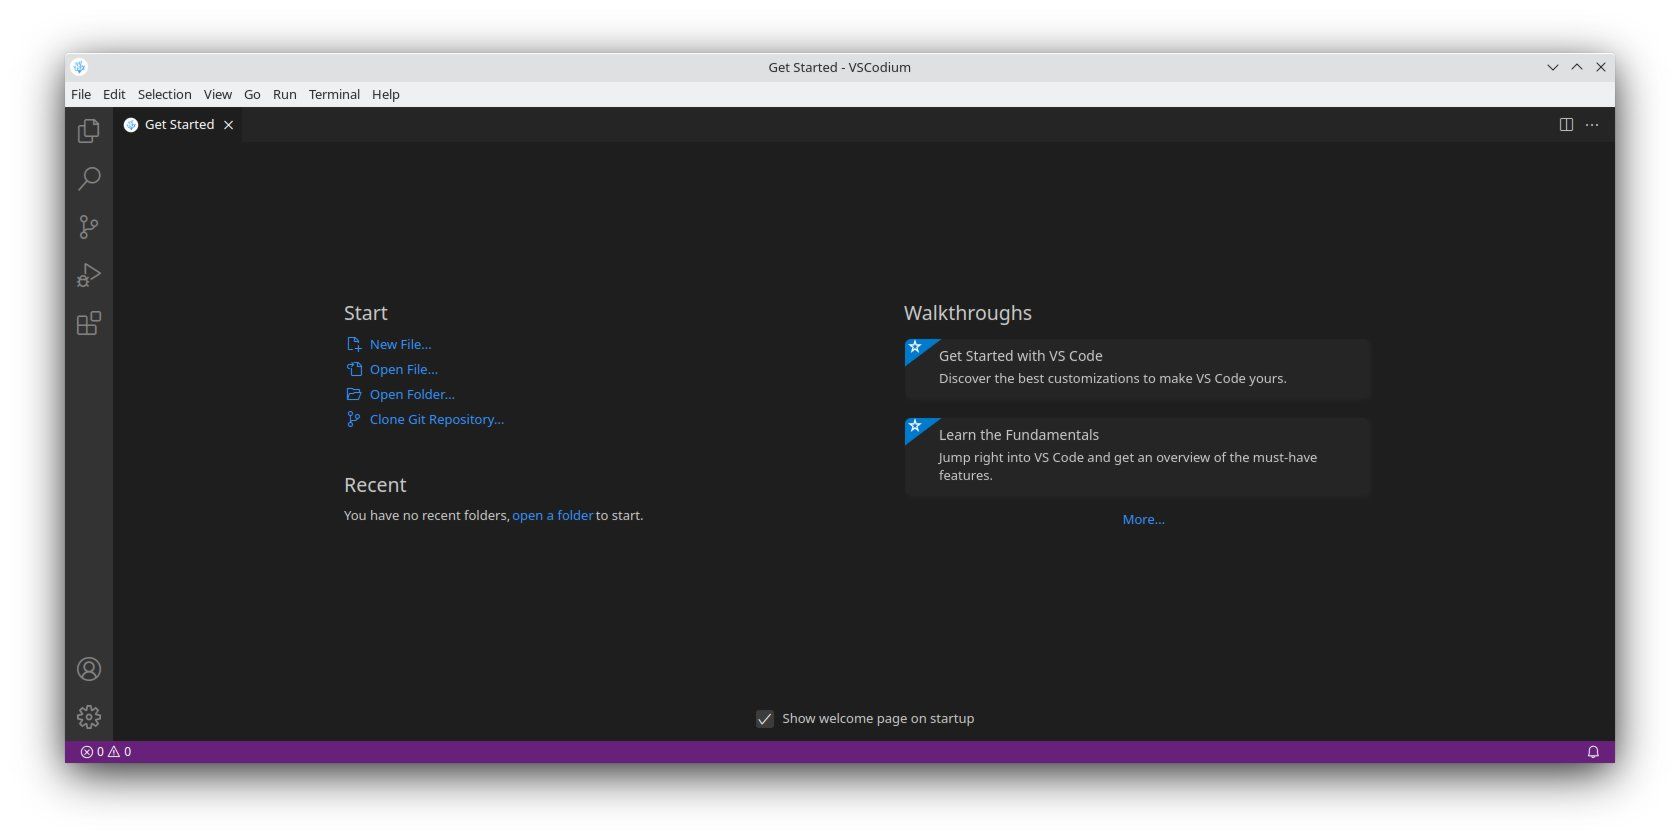 A screenshot of the VSCodium default "Get Started" screen.